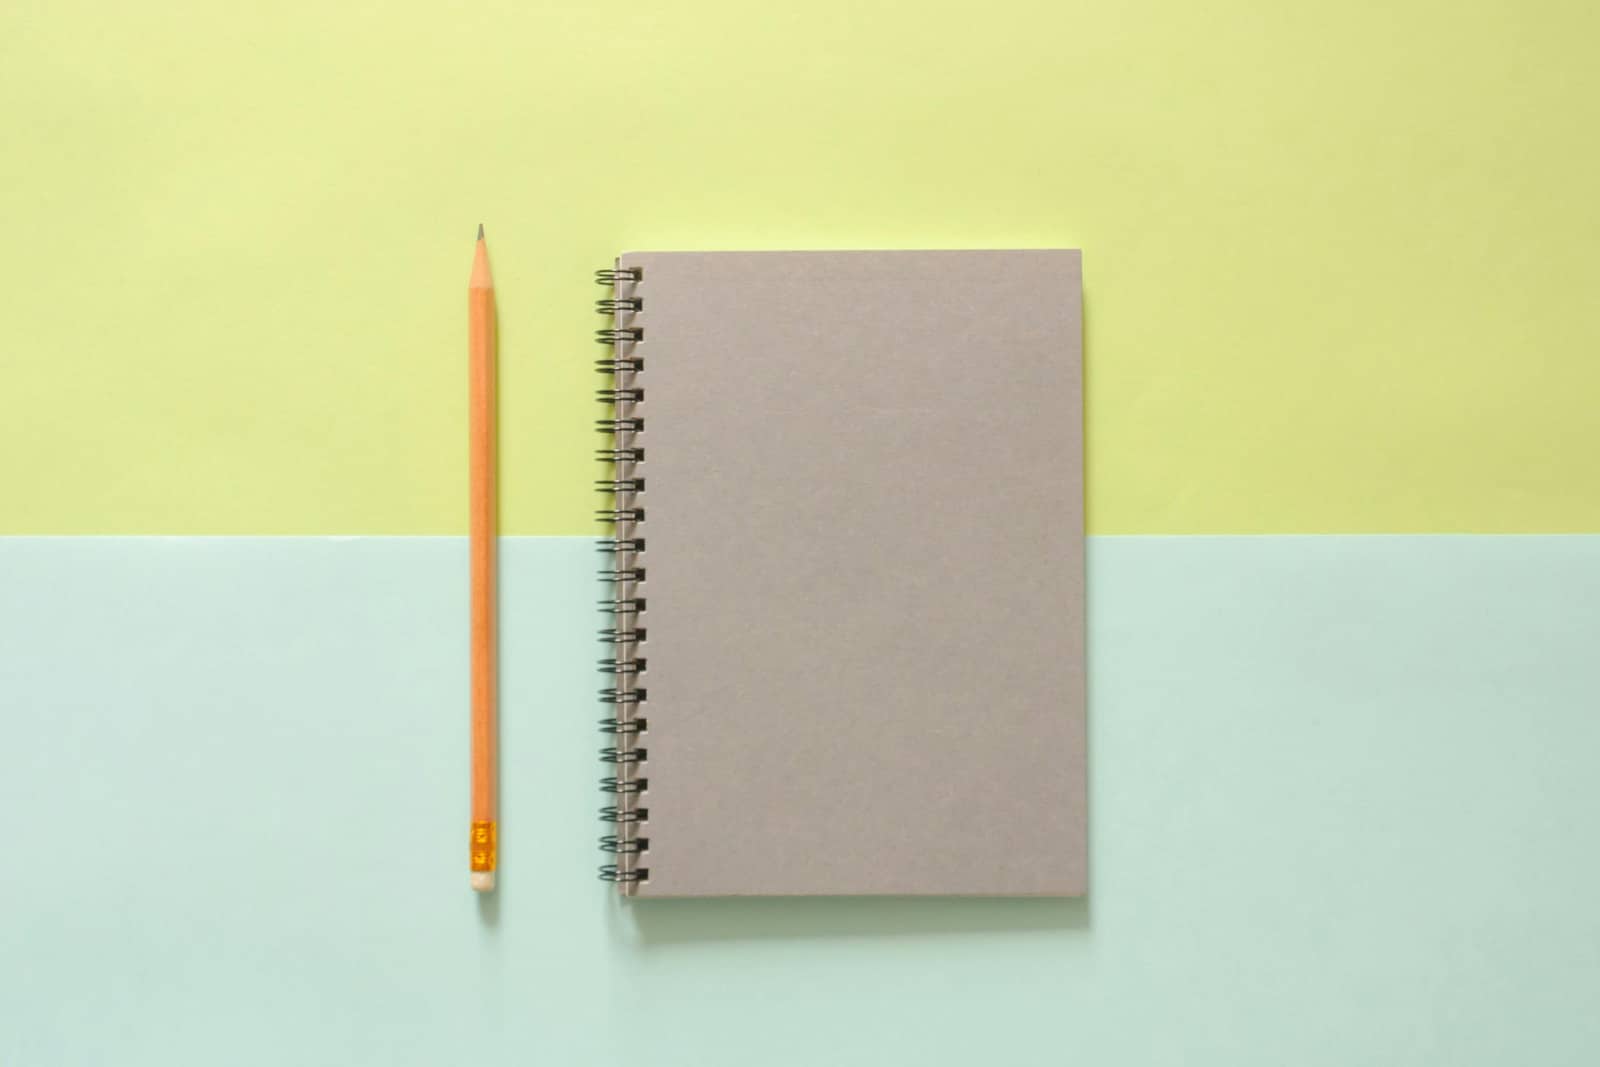 Notebook and pencil on blue and yellow background